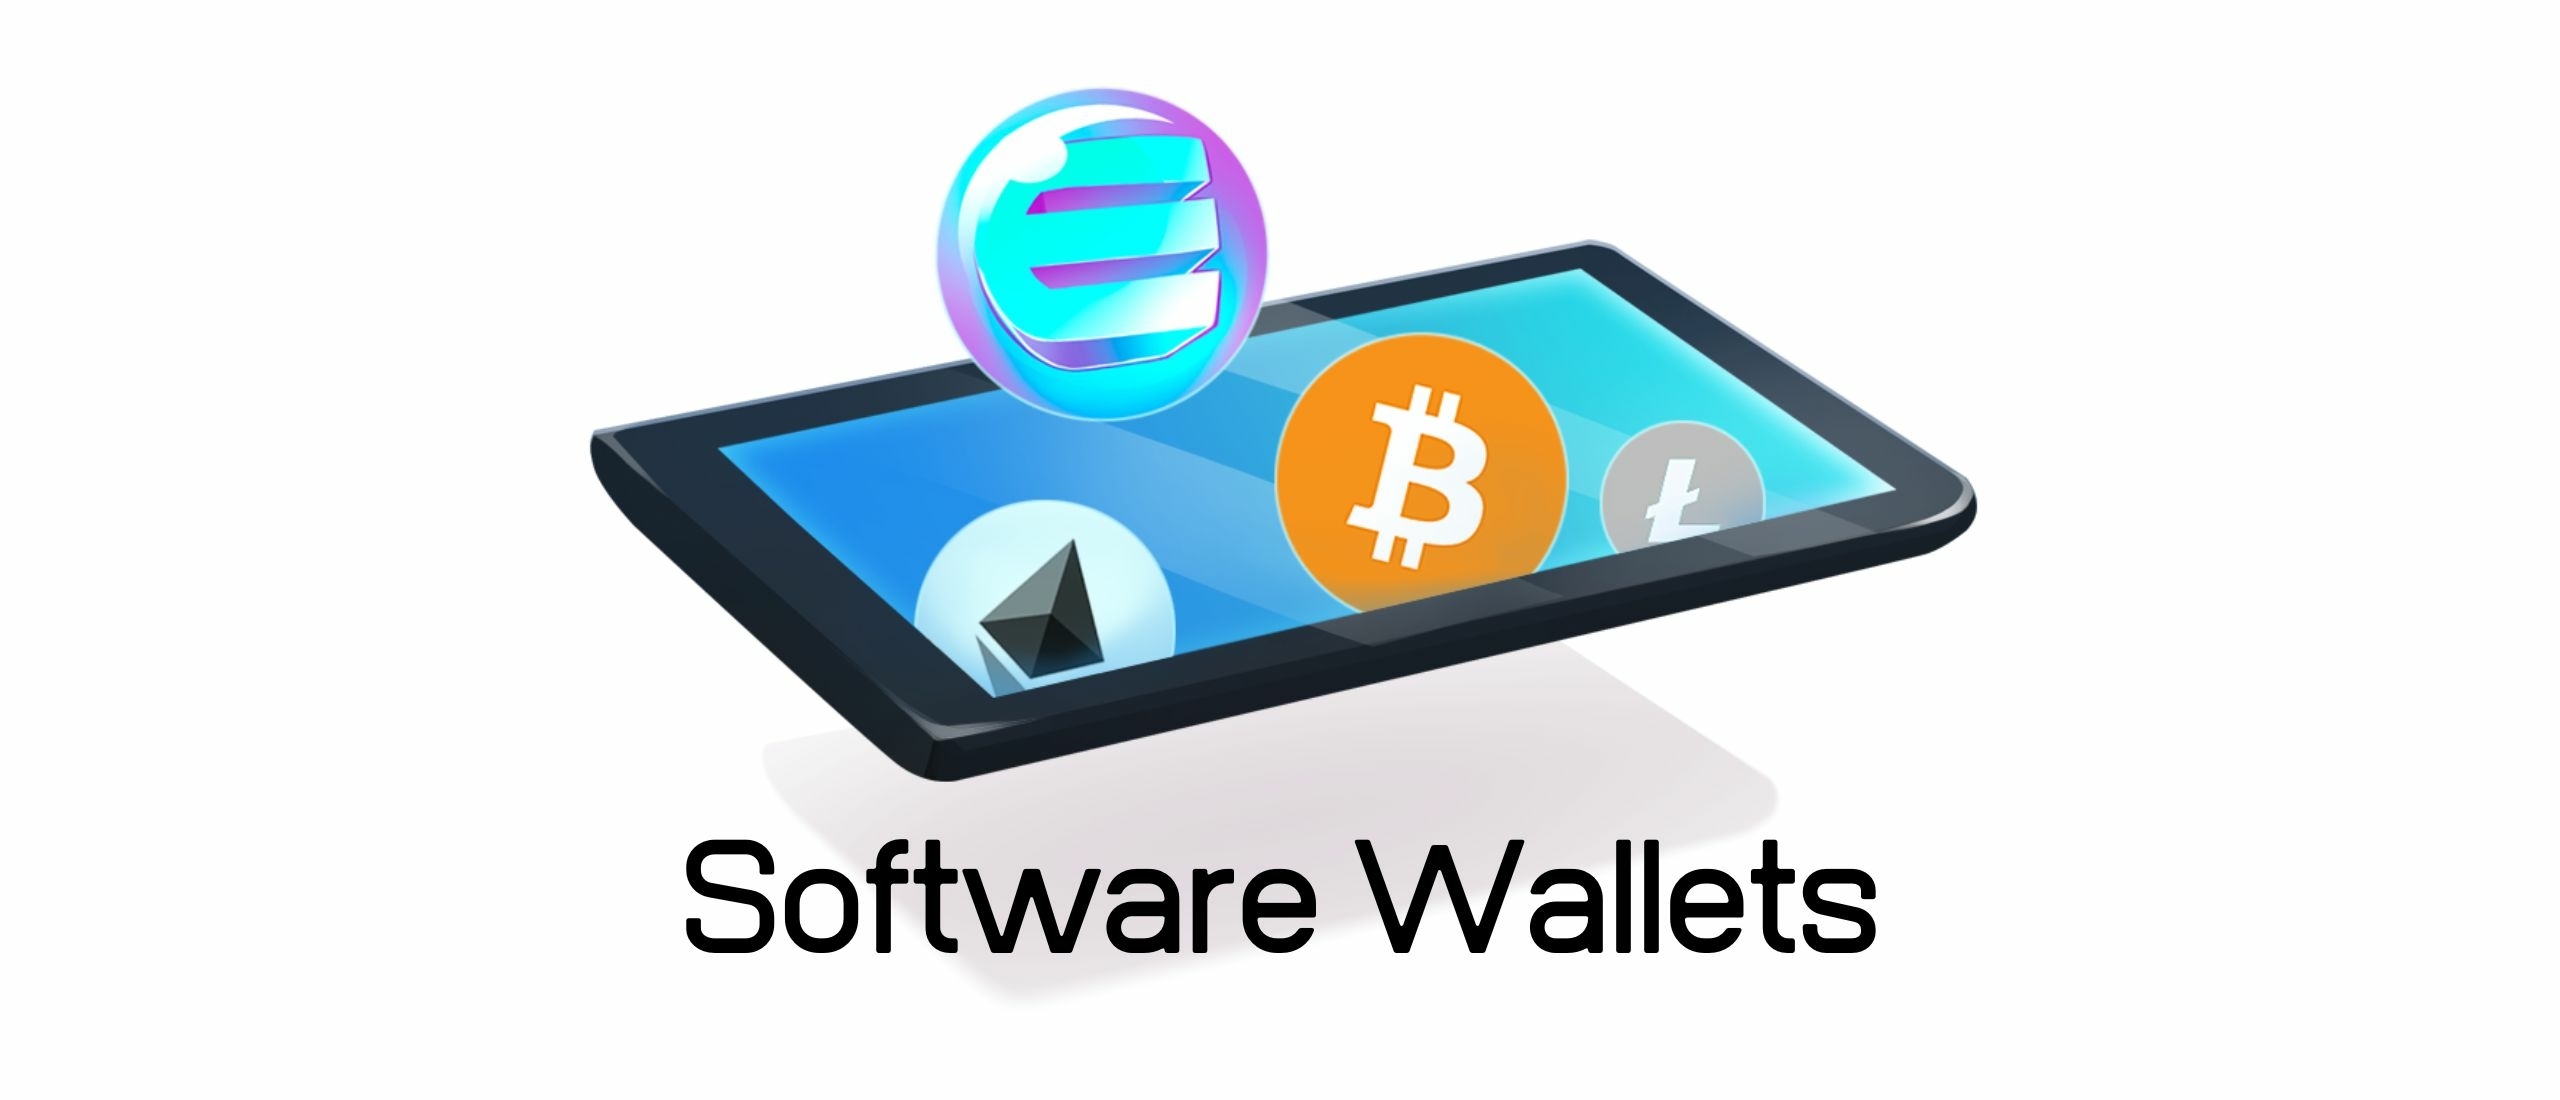 Software Wallets